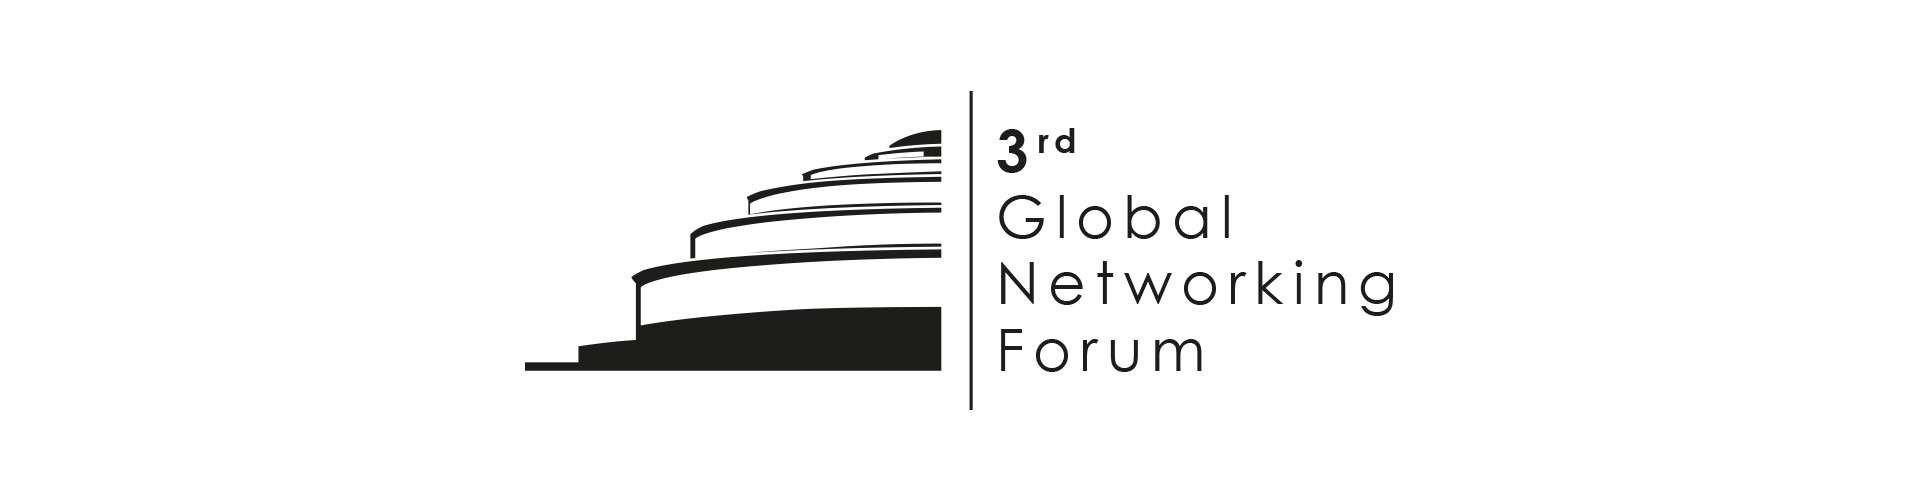 3rd Global Networking Forum!